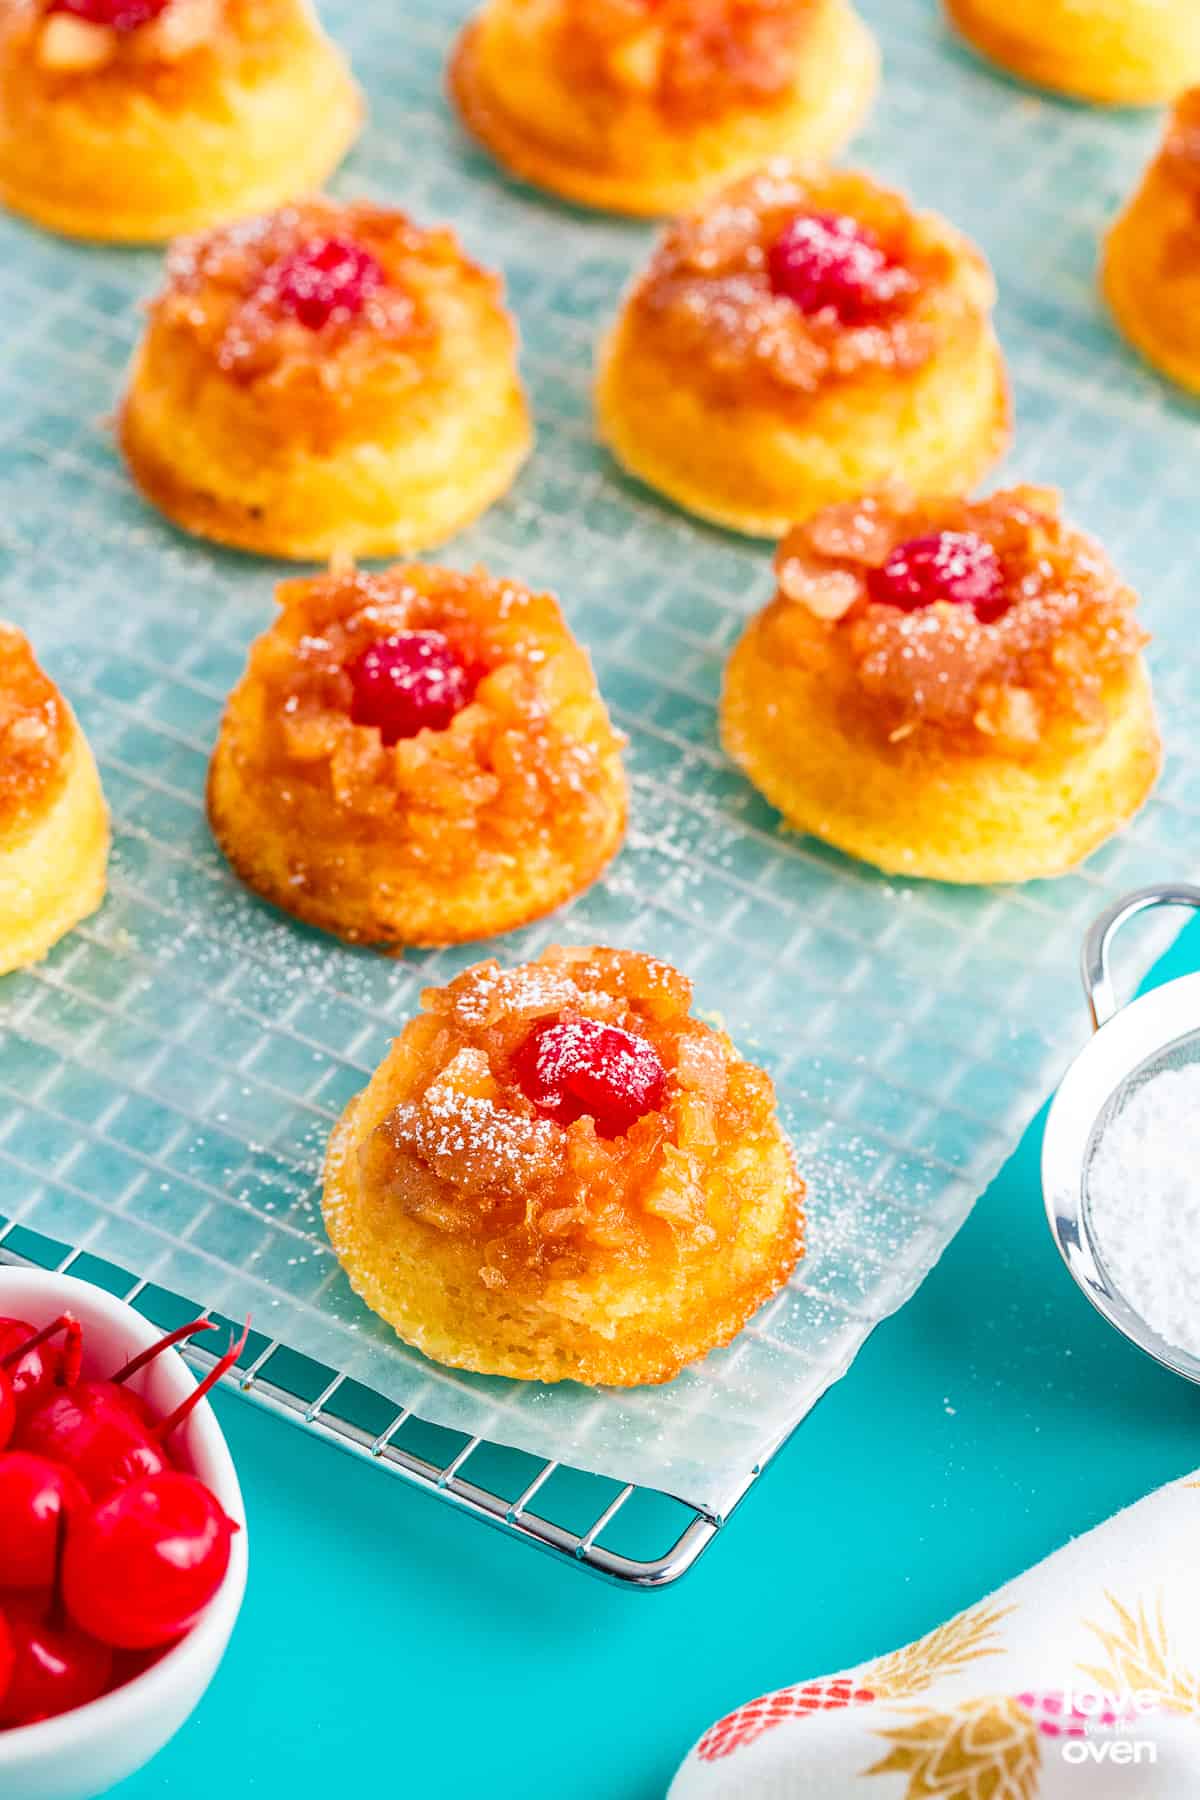 https://www.lovefromtheoven.com/wp-content/uploads/2023/02/pineapple-upside-down-cupcakes-21.jpg